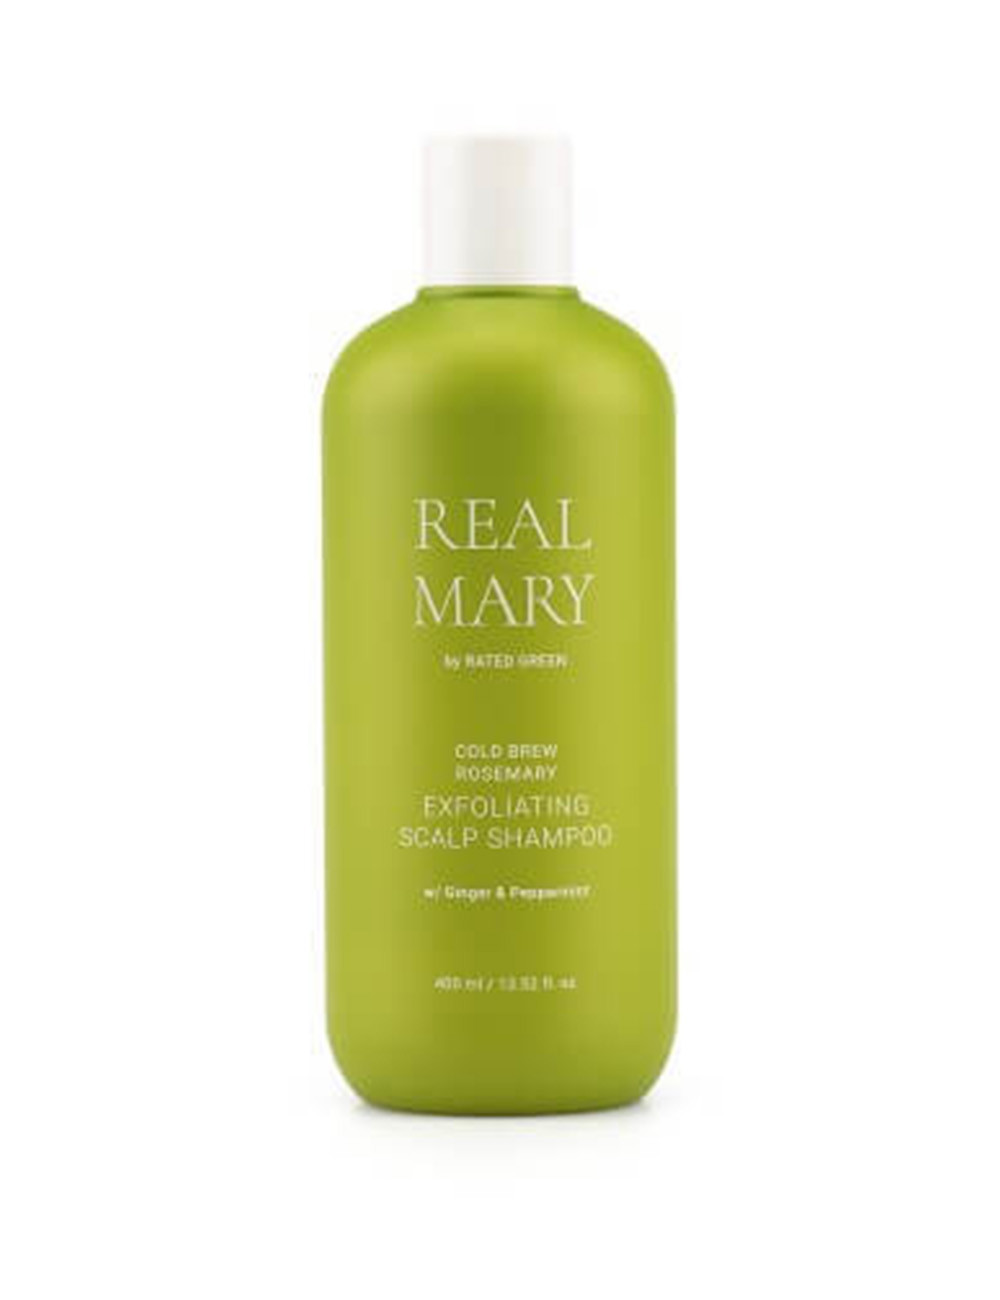 Rated Green REAL MARY EXFOLIATING SCALP SHAMPOO